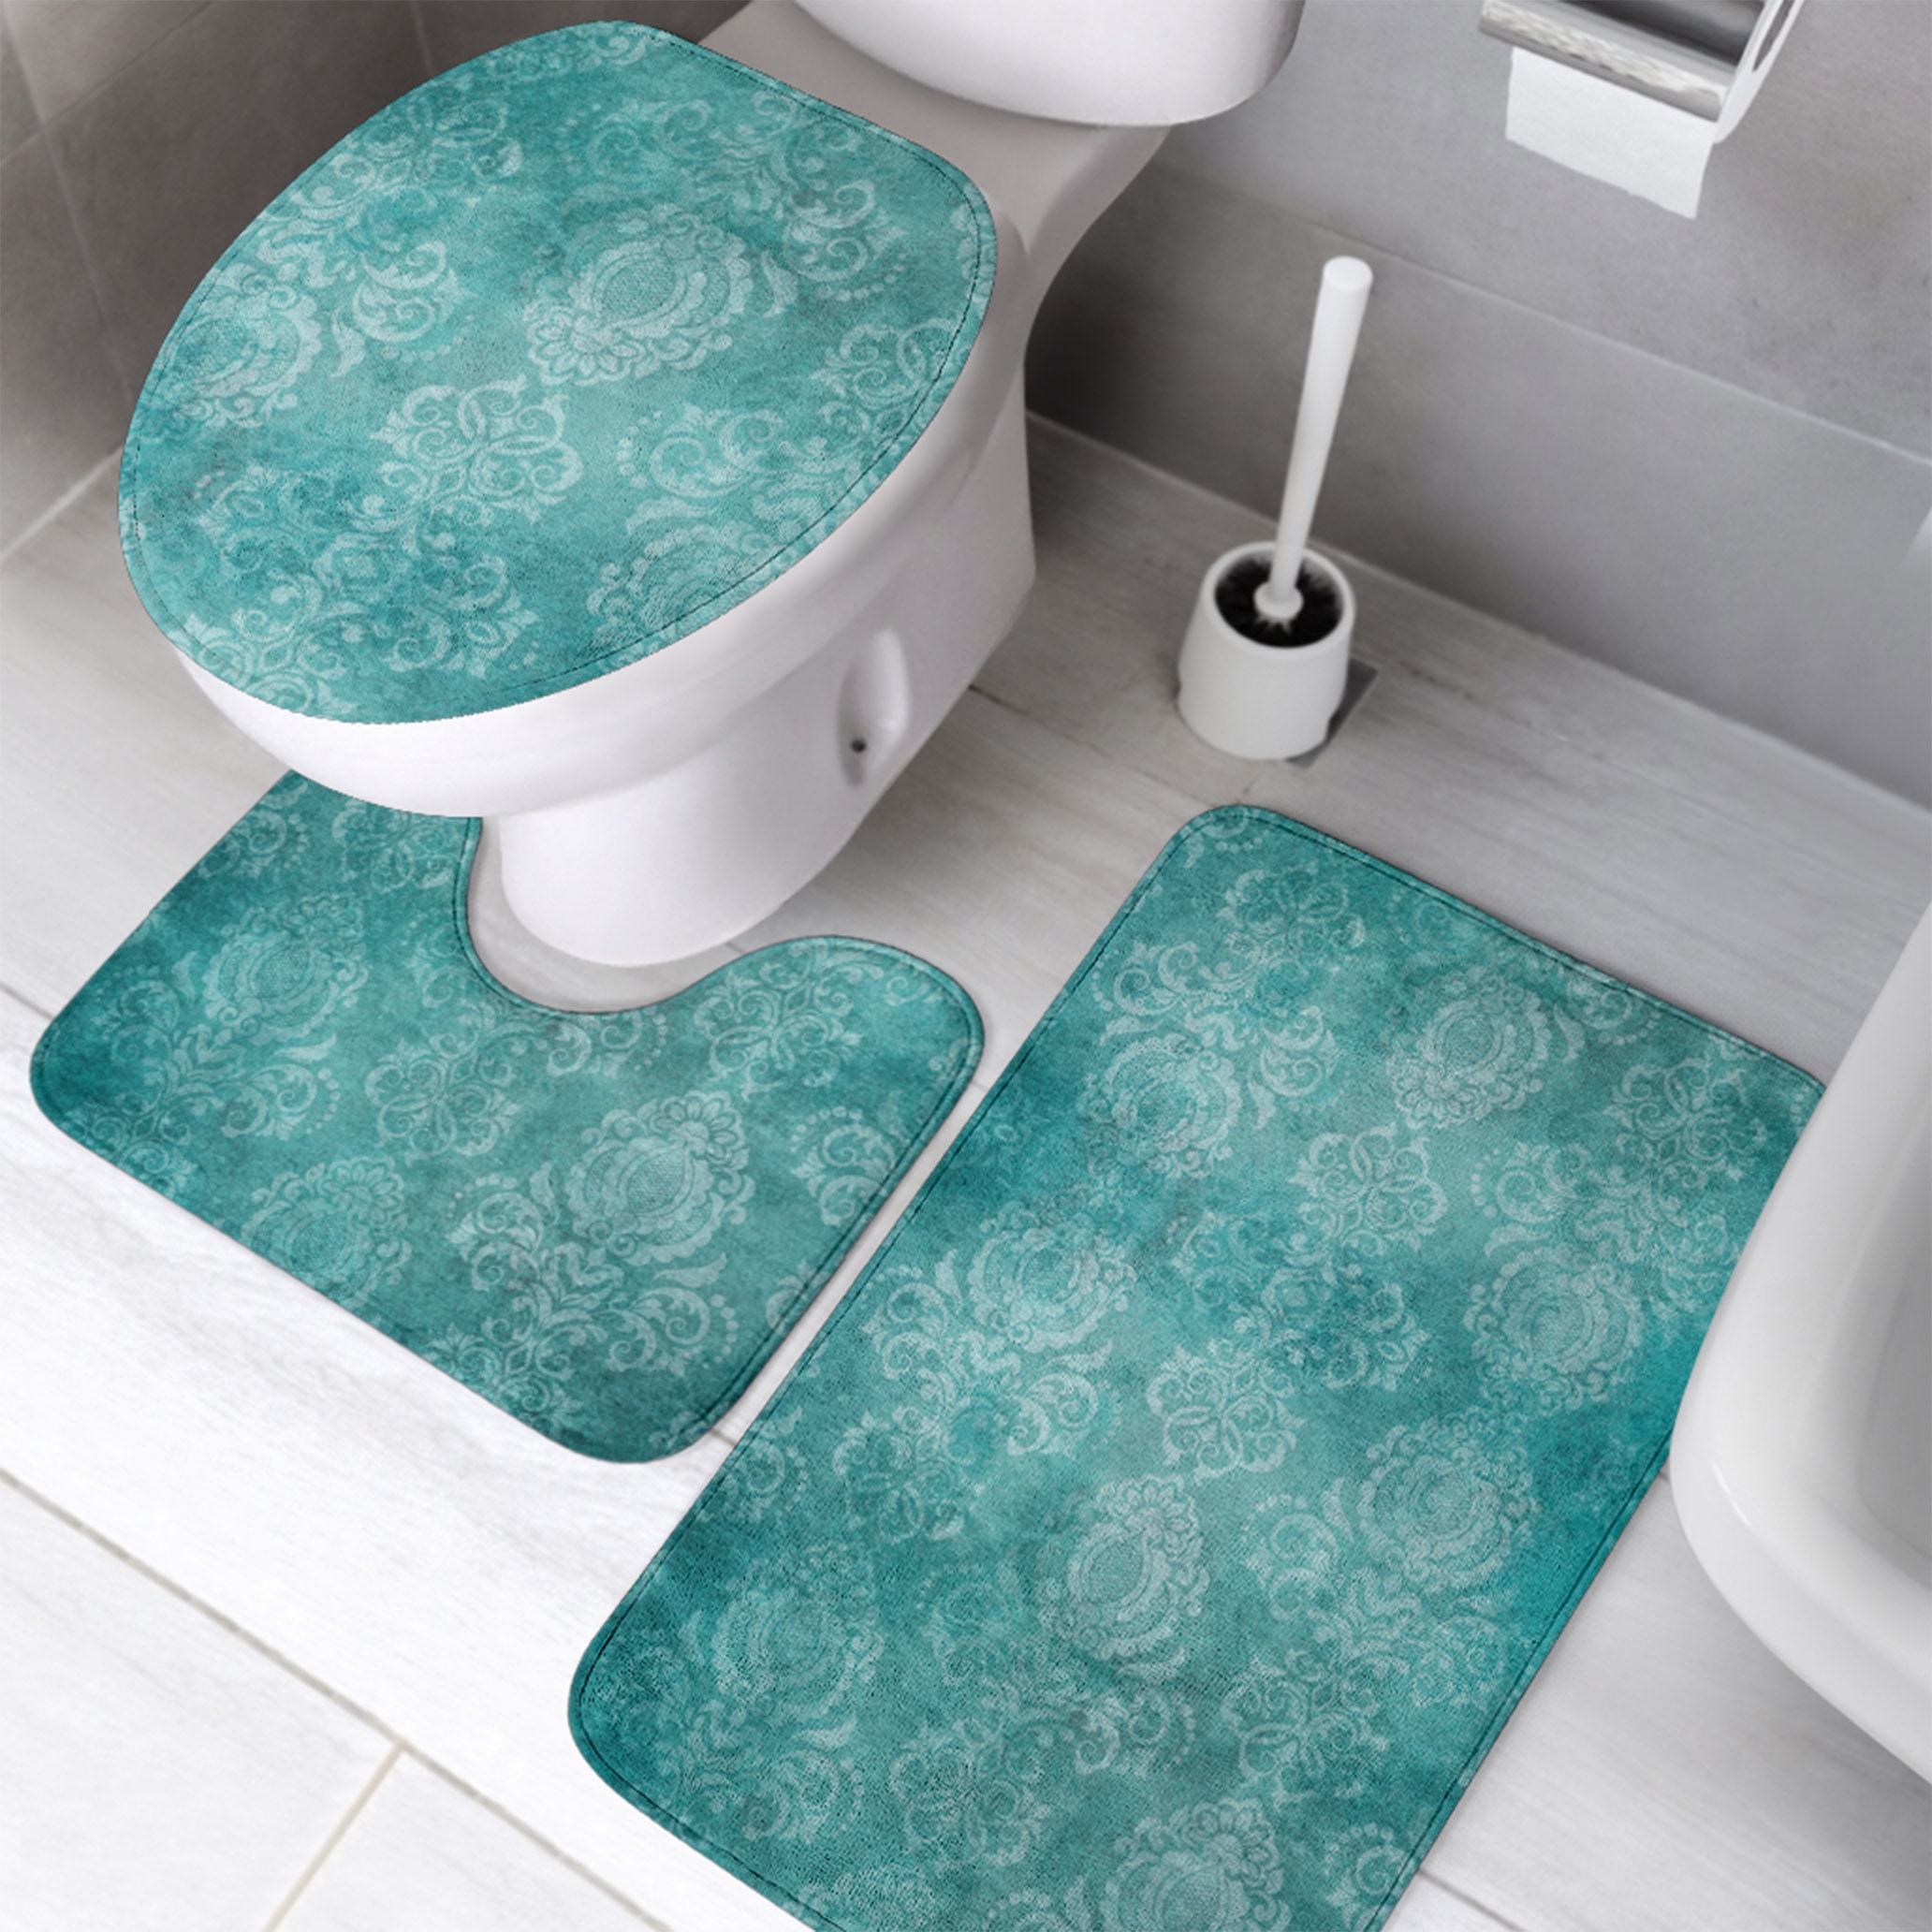 Aesthetic 70S Abstract Wavy Swirl Contour Mat and Toilet Lid Cover Sets,  Cute Sage Green Shower Mats Bath Rug, Aesthetic Retro Boho Minimal Bathroom